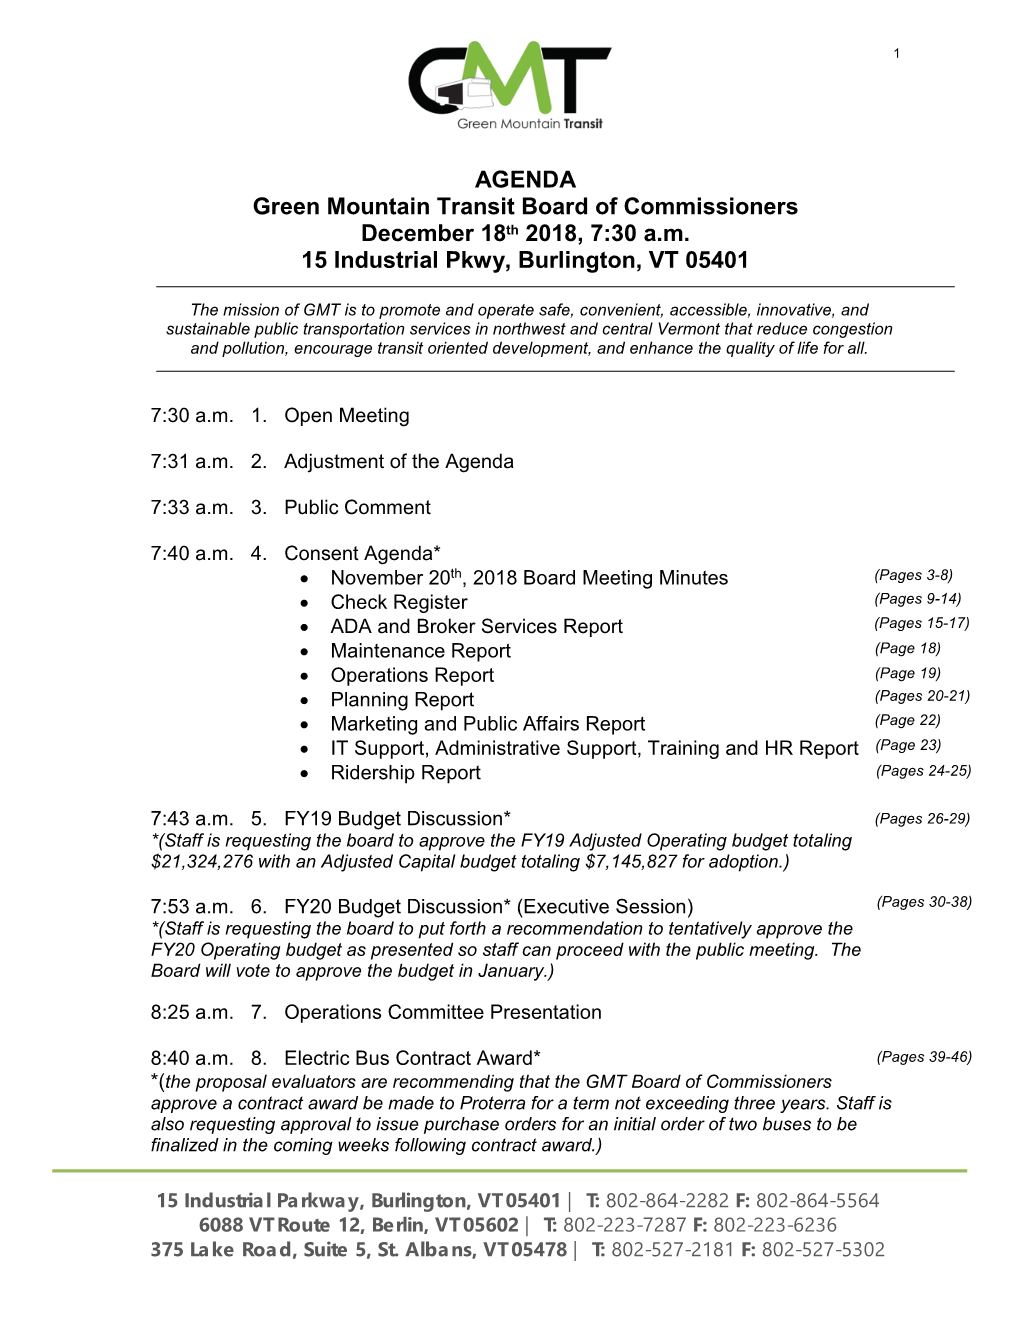 AGENDA Green Mountain Transit Board of Commissioners December 18Th 2018, 7:30 A.M